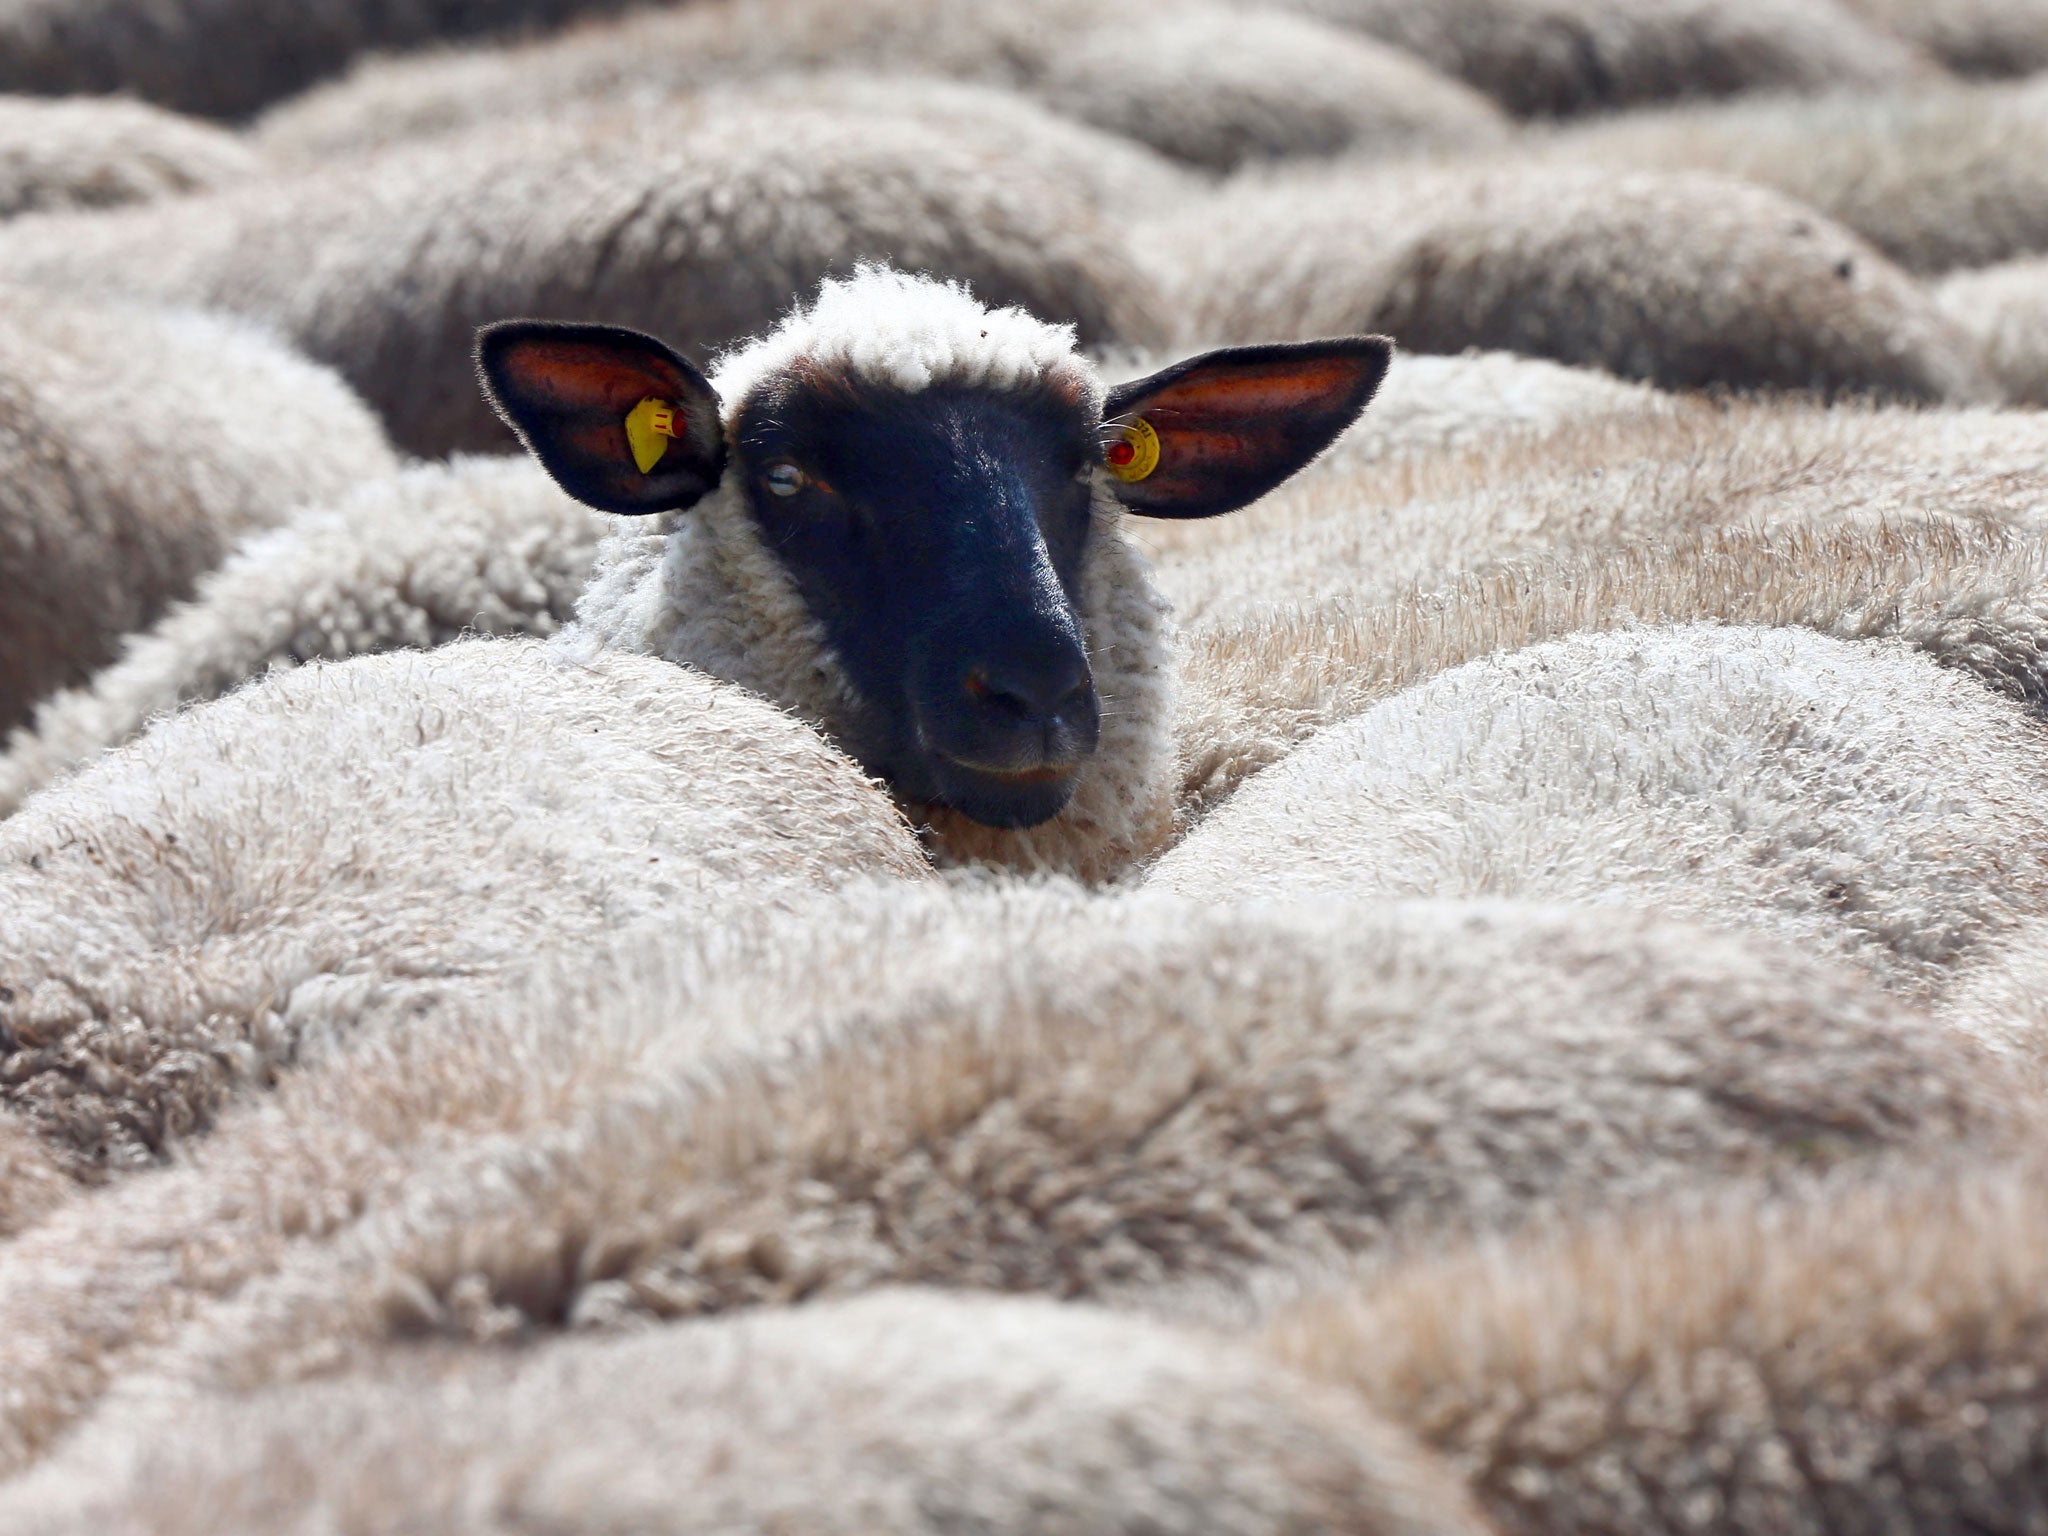 Police have appealed for witnesses after 160 sheep were stolen near the village of Wool